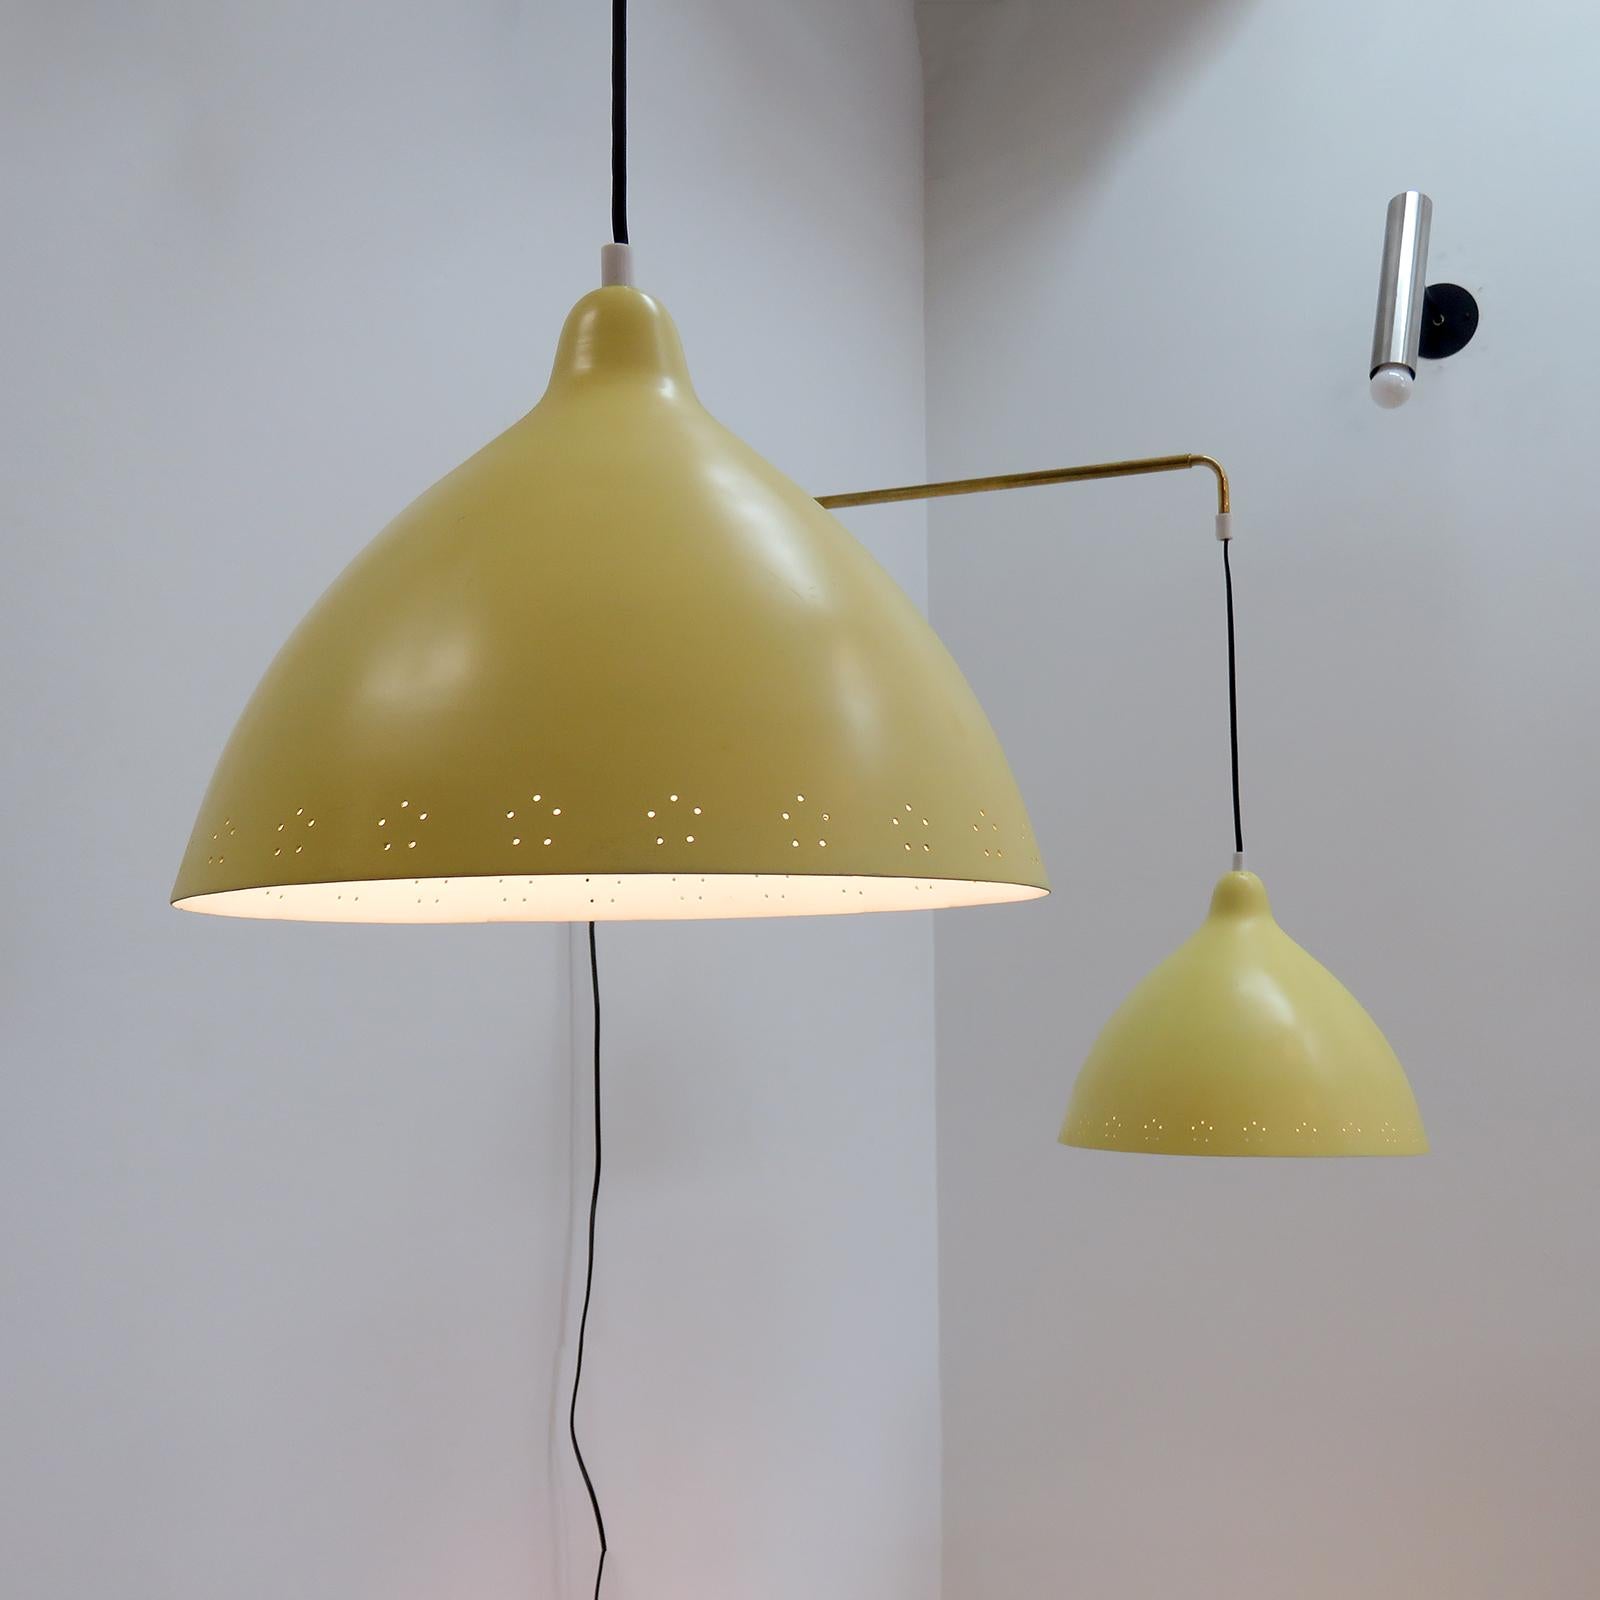 Swing Arm Wall Lights by Lisa Johansson-Pape for Orno, 1960 For Sale 1